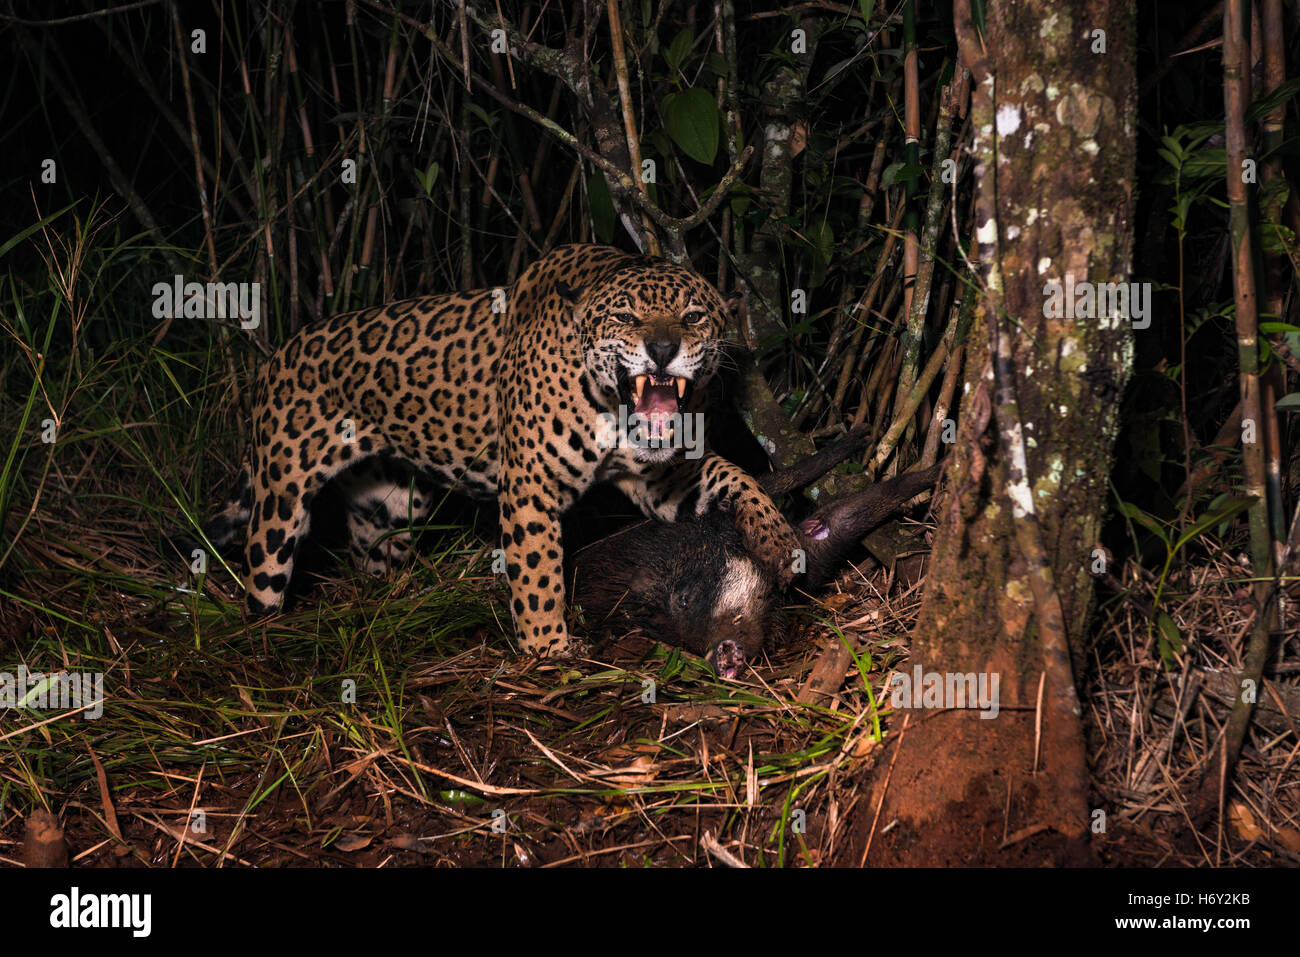 A Jaguar aggressively protects its prey, a White-lipped Peccary. Stock Photo